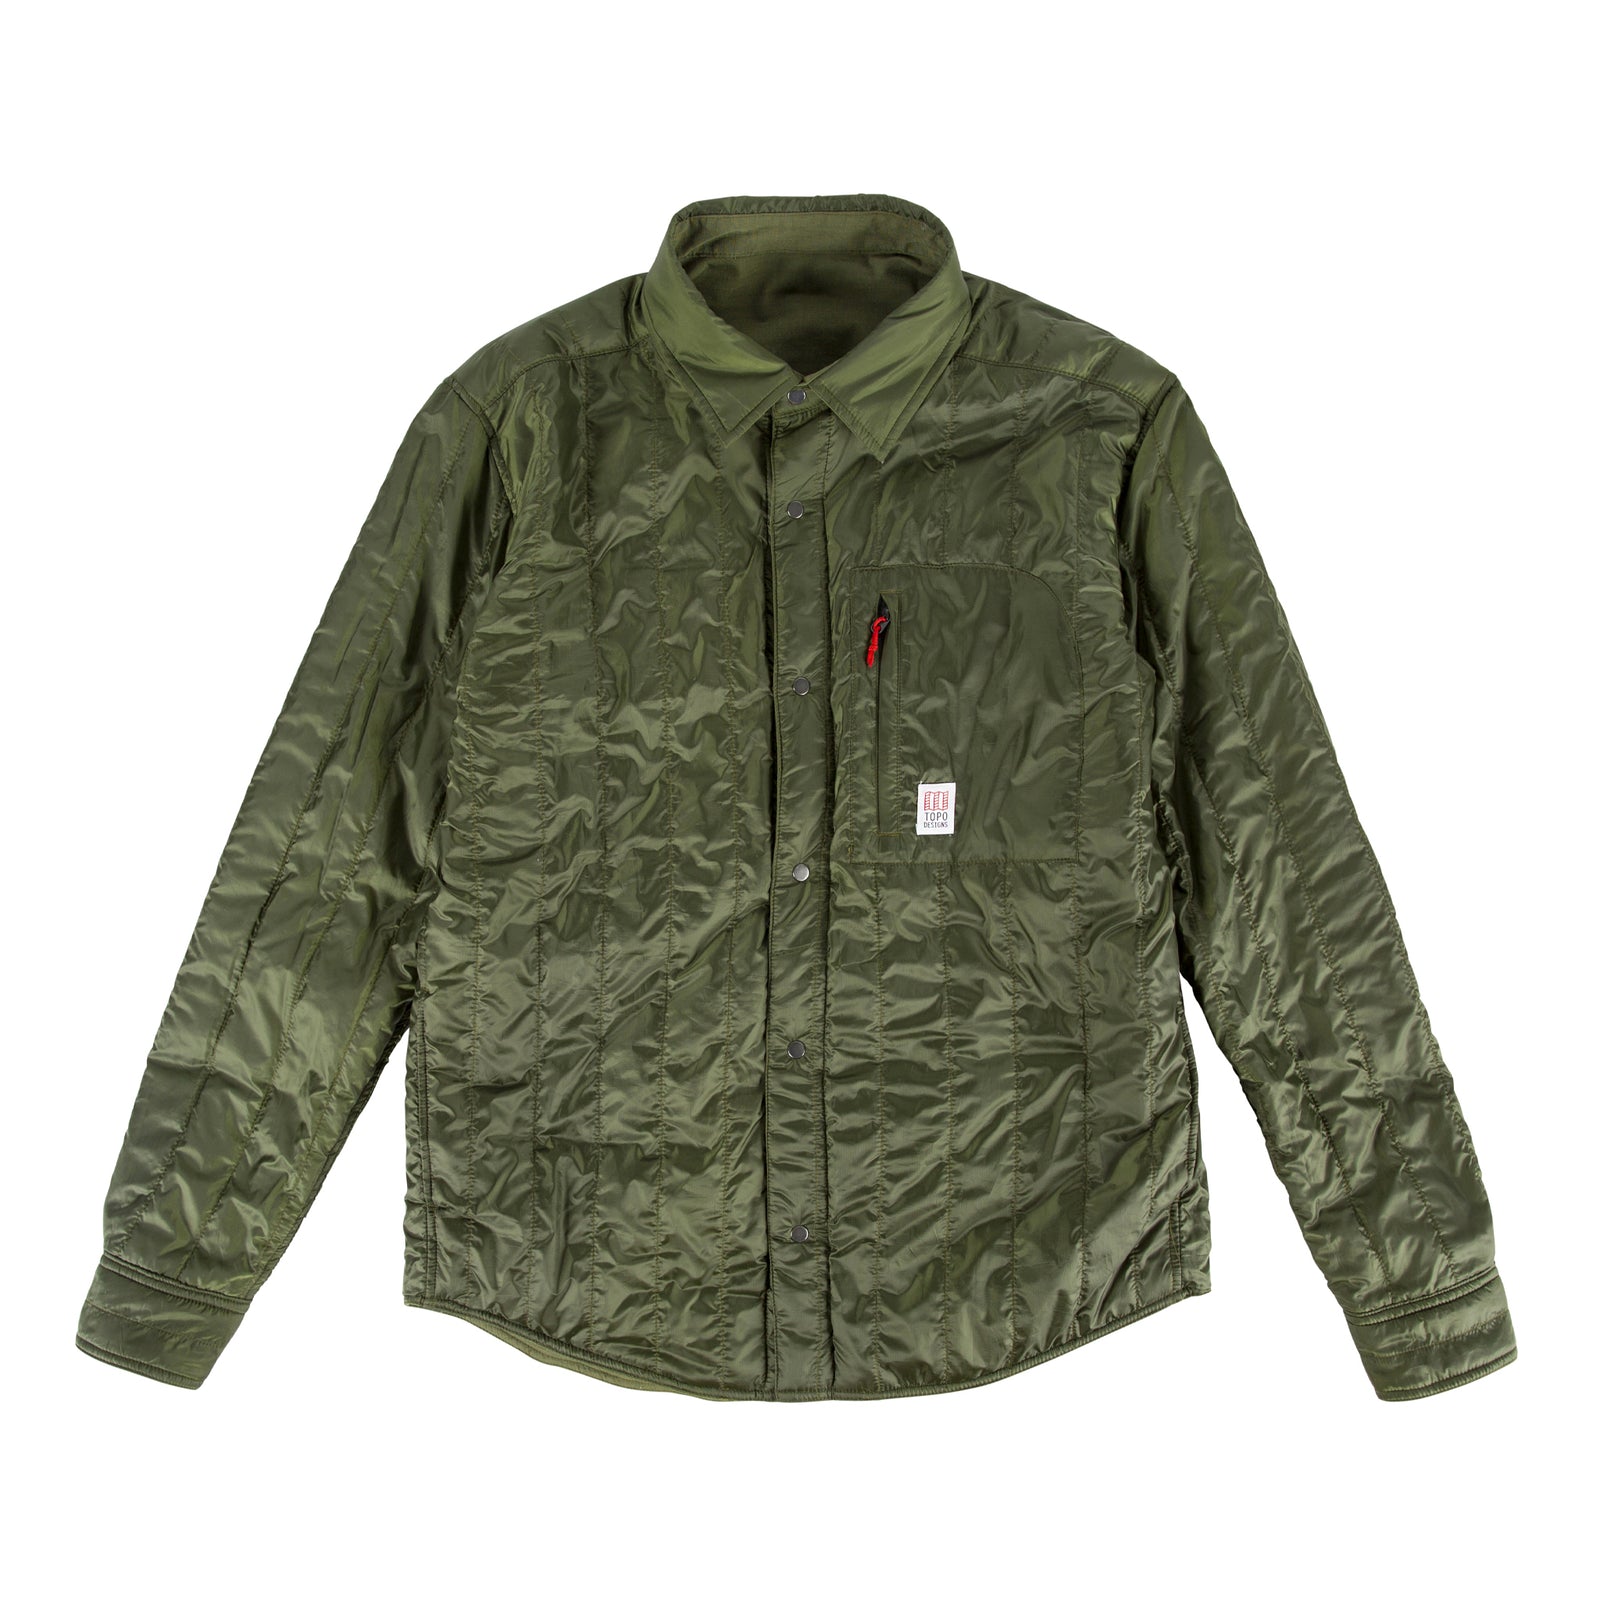 General inside shot of Topo Designs Men's Insulated Shirt Jacket in "Olive" showing lining.